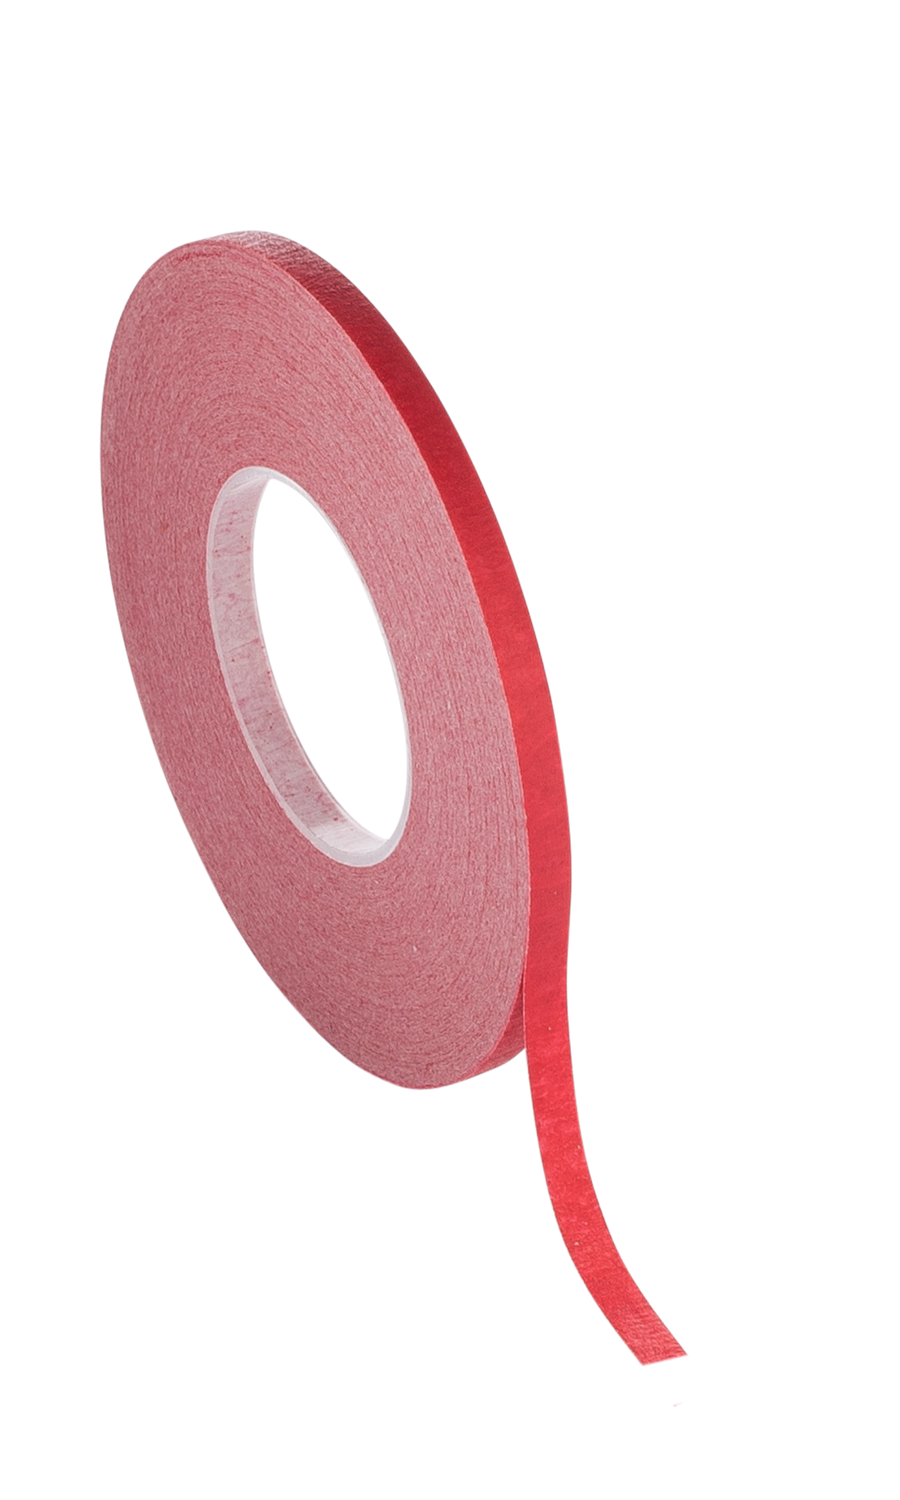 1/8" x 648" Red Crepe Tape